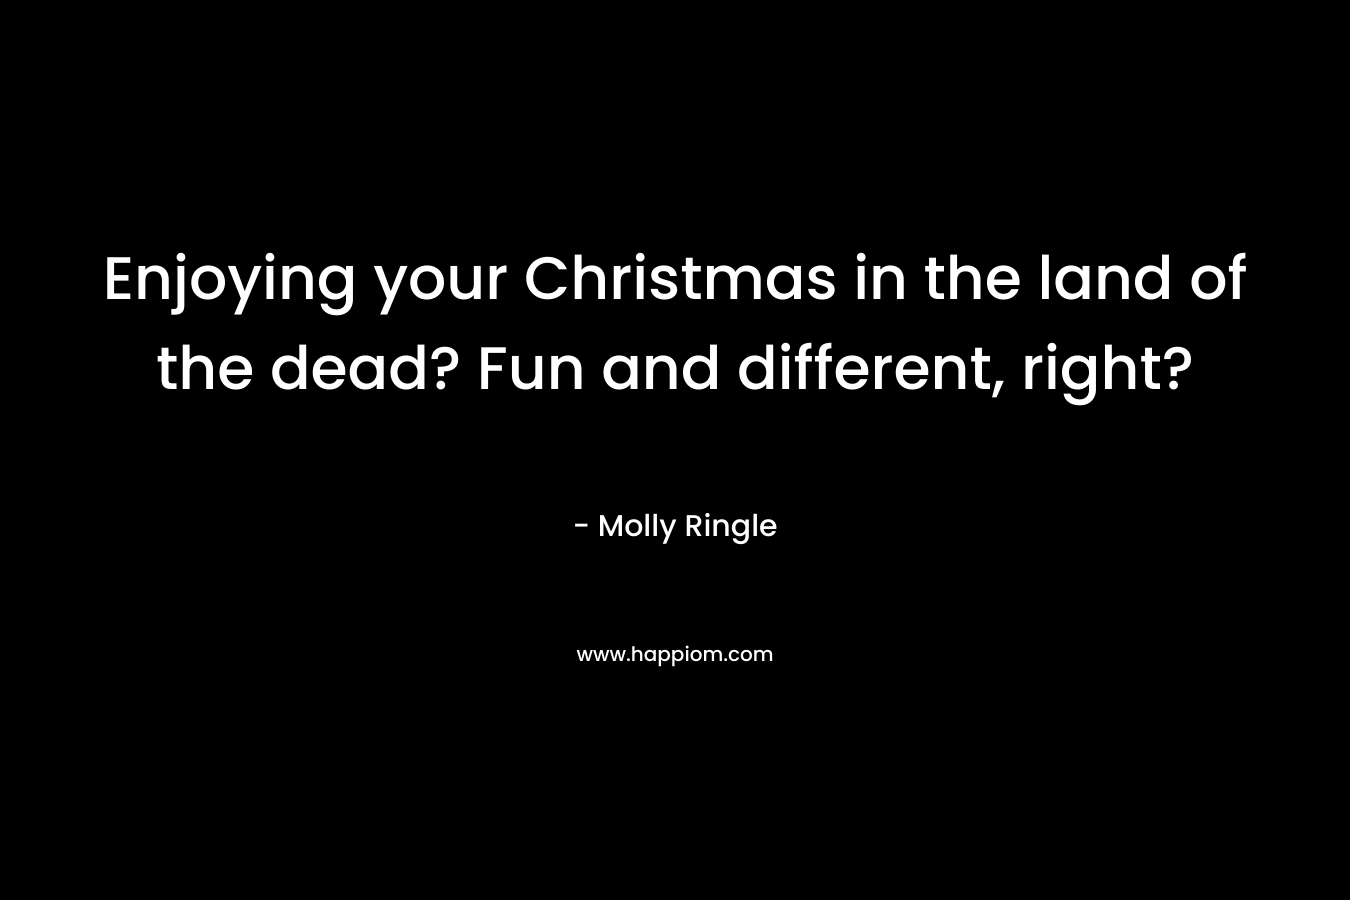 Enjoying your Christmas in the land of the dead? Fun and different, right? – Molly Ringle